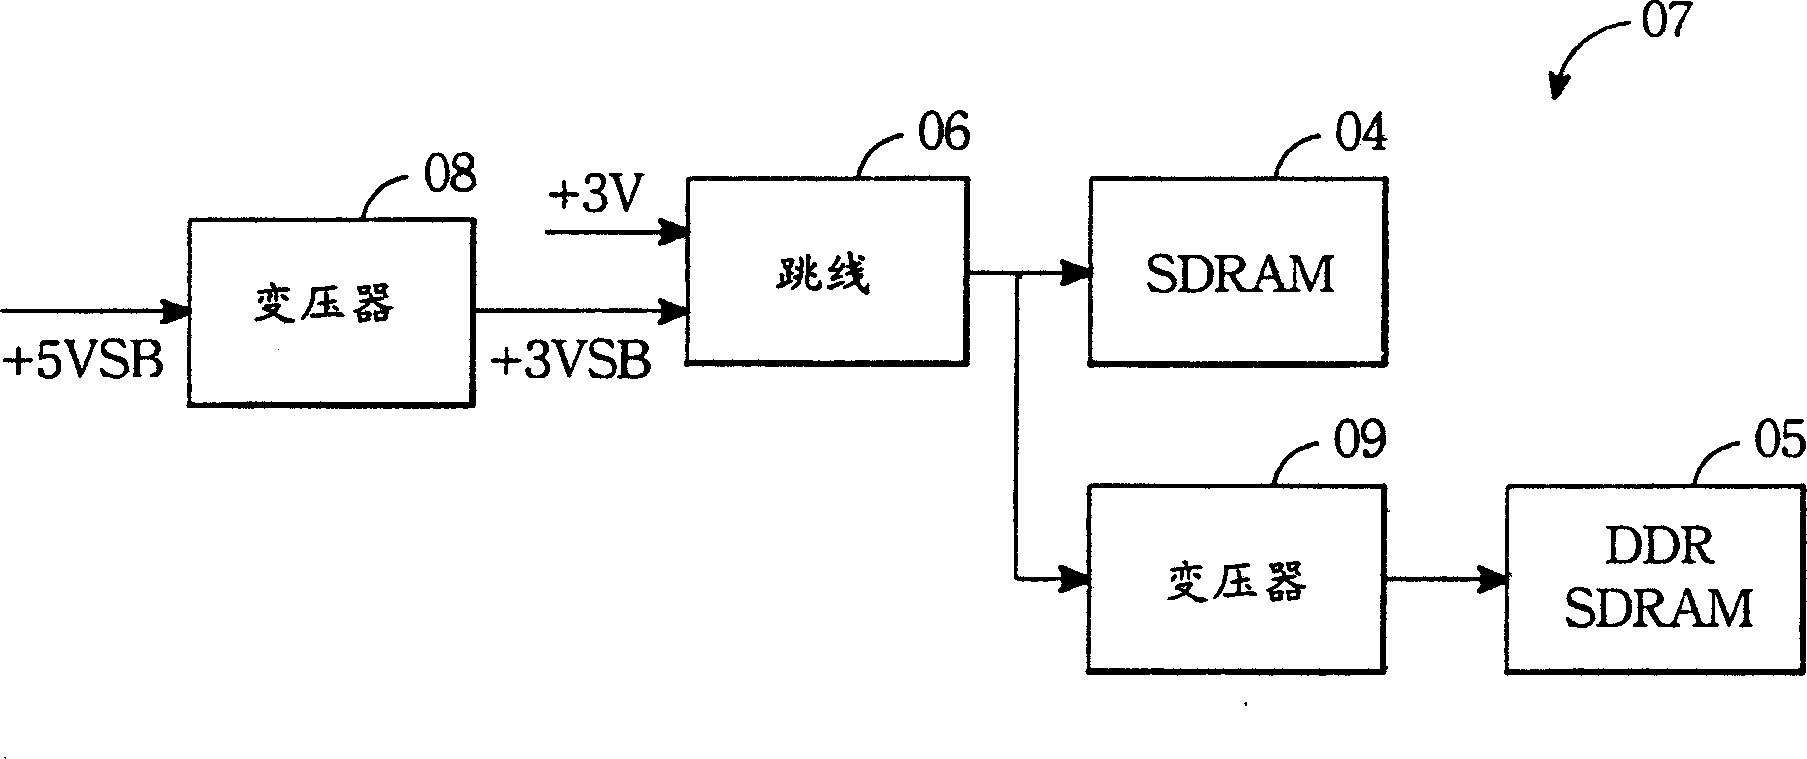 System and method for switching on between operation-state and stand-by state of computer